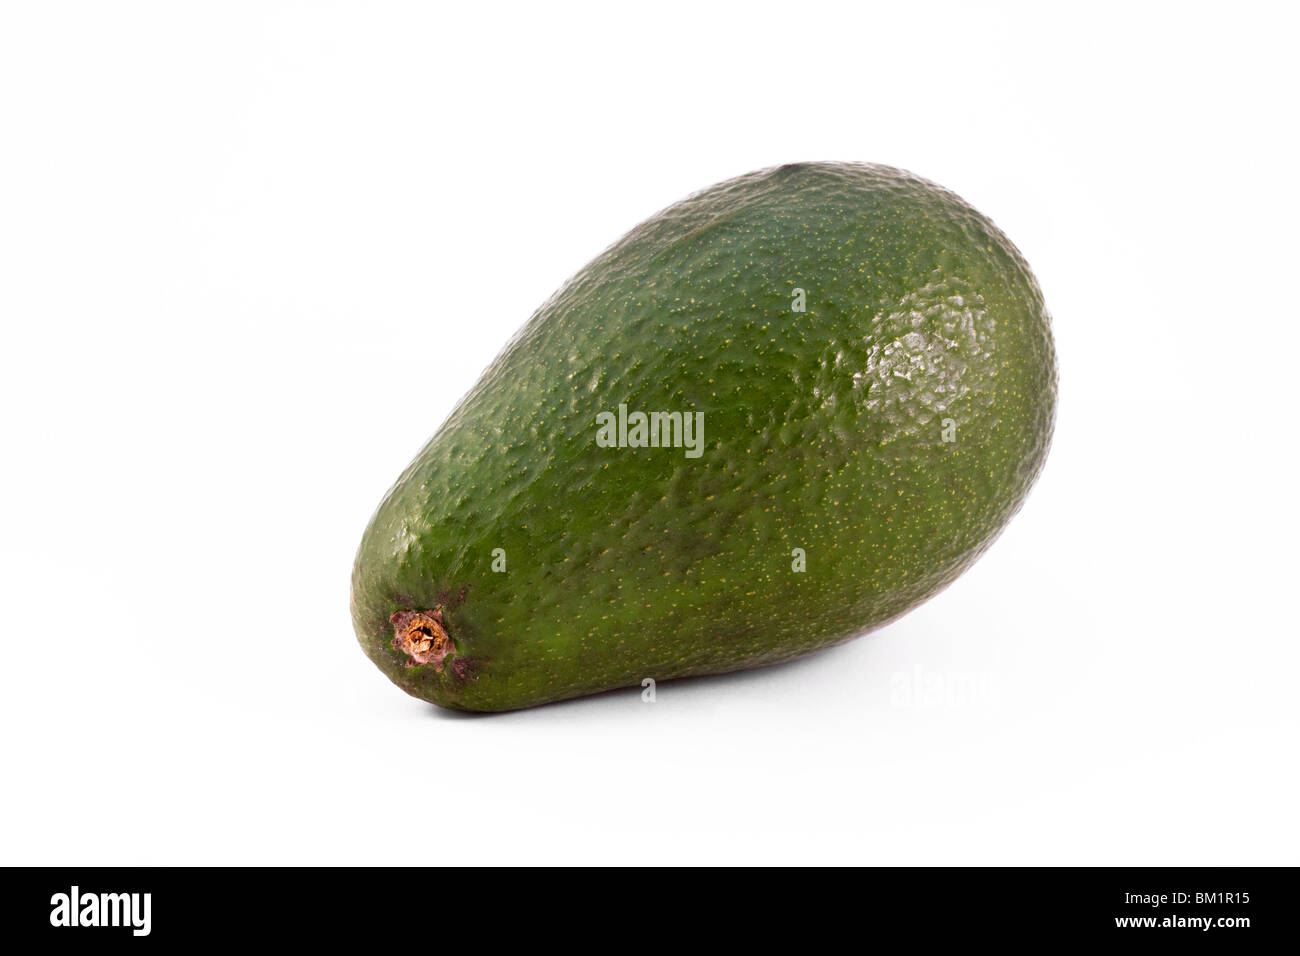 green avocado isolated on a white background Stock Photo